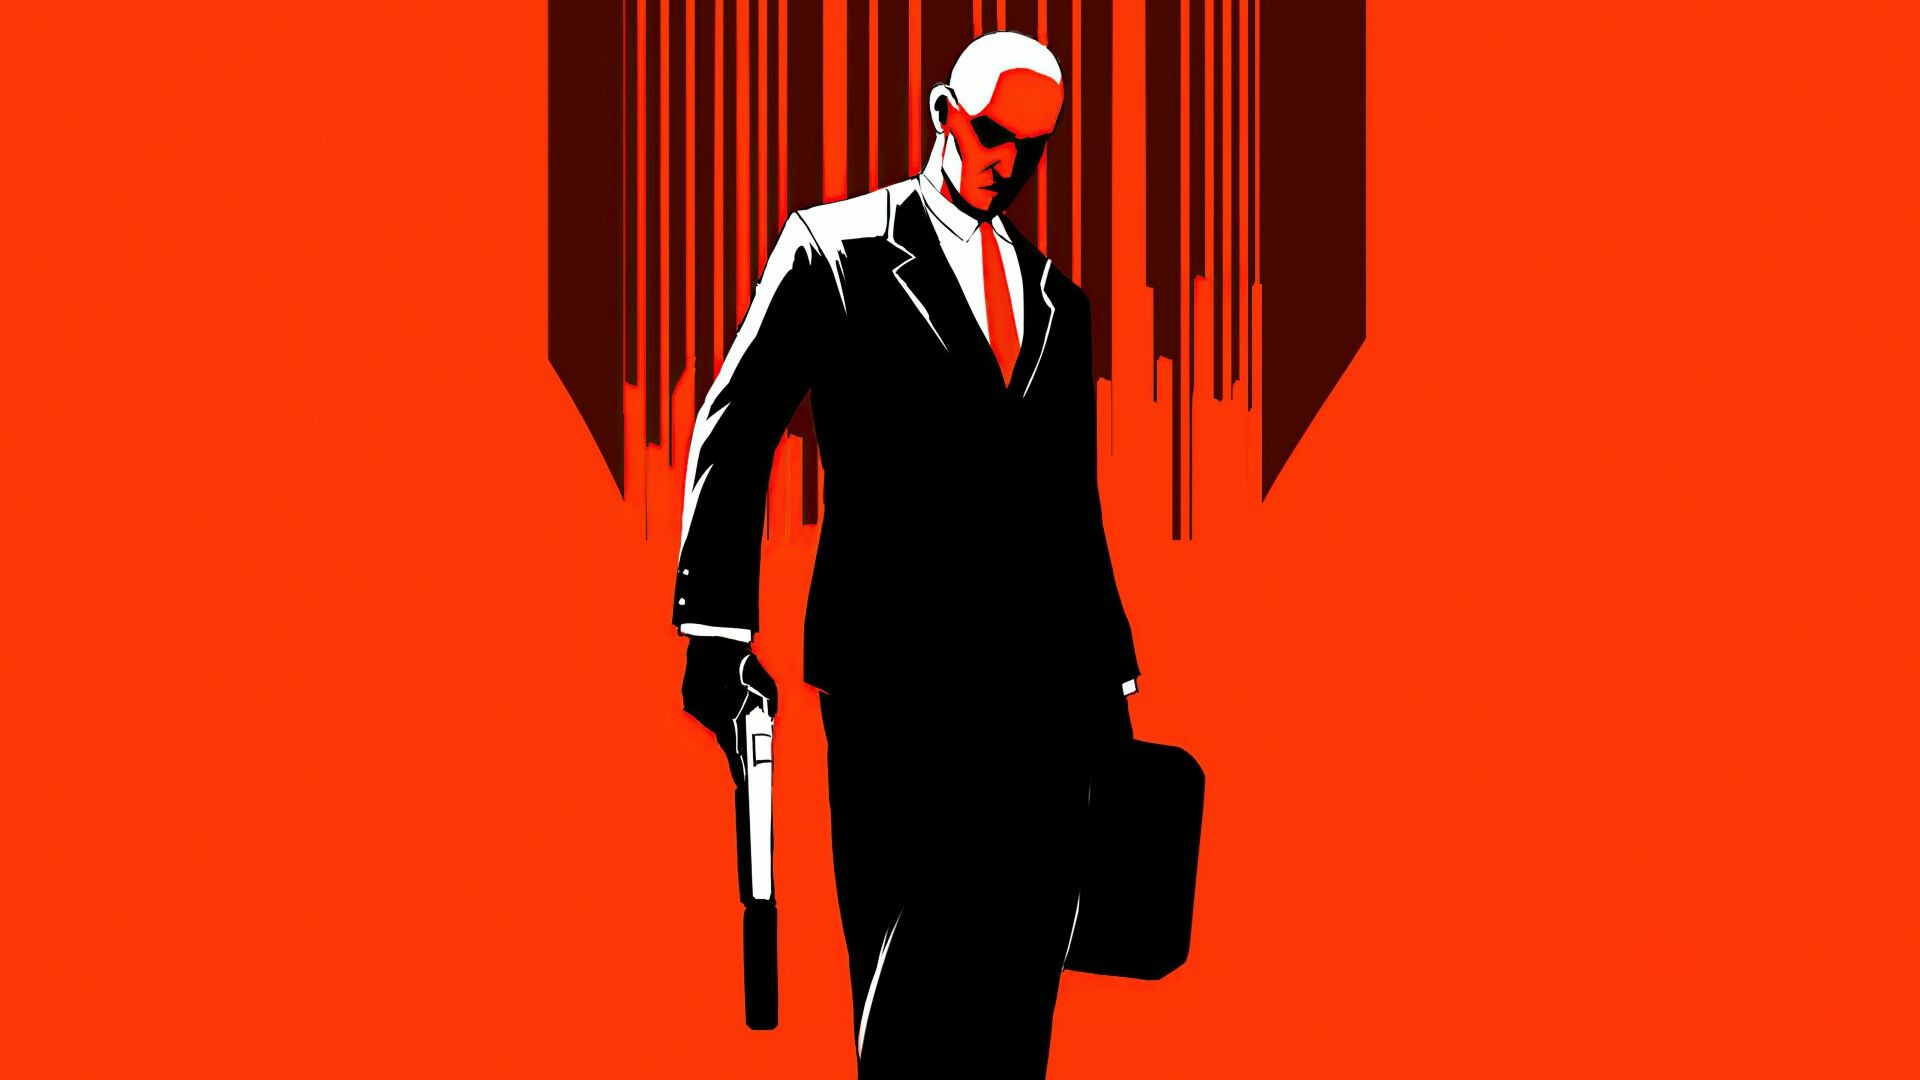 Hitman (Game): A stealth shooter franchise, The ultimate spy thriller story. 1920x1080 Full HD Background.